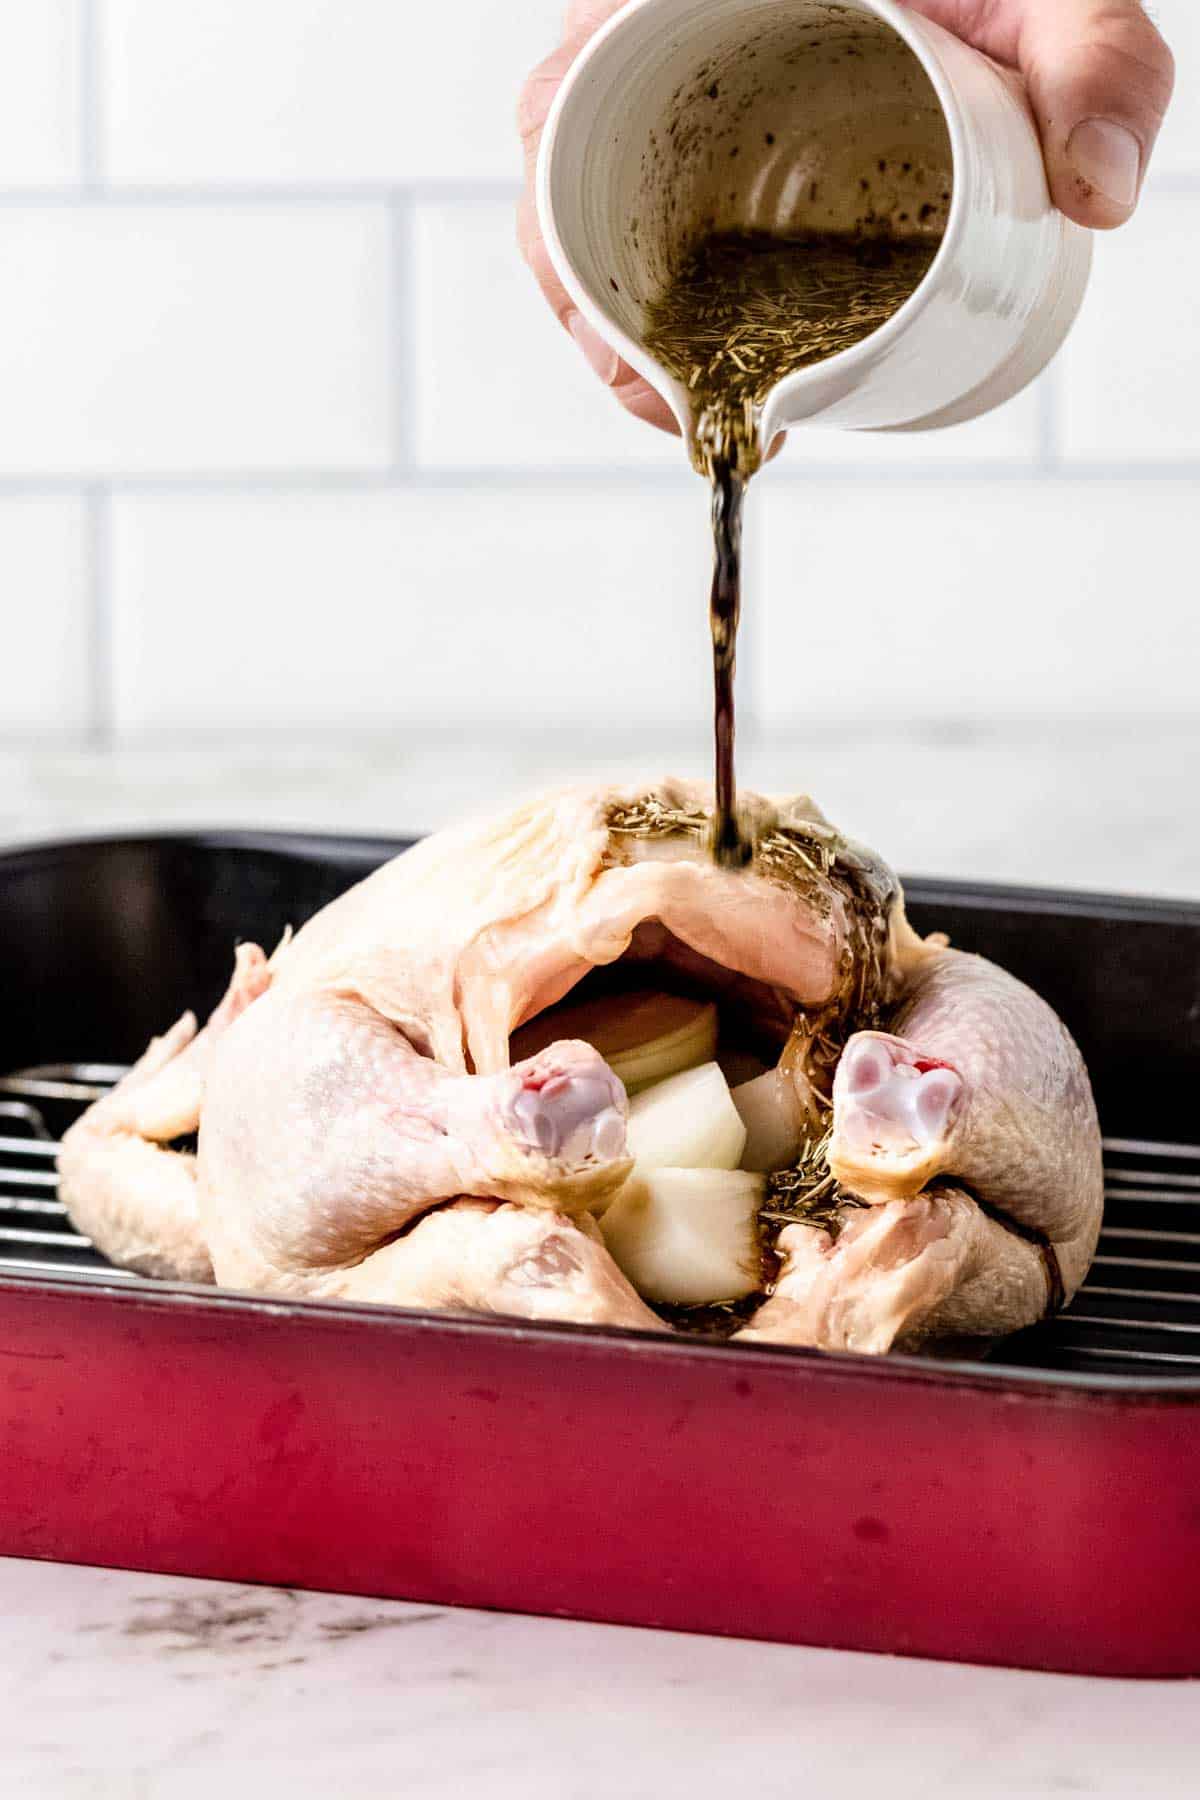 Rosemary balsamic marinade is poured over a whole raw chicken stuffed with chopped onions in a red roasting pan.